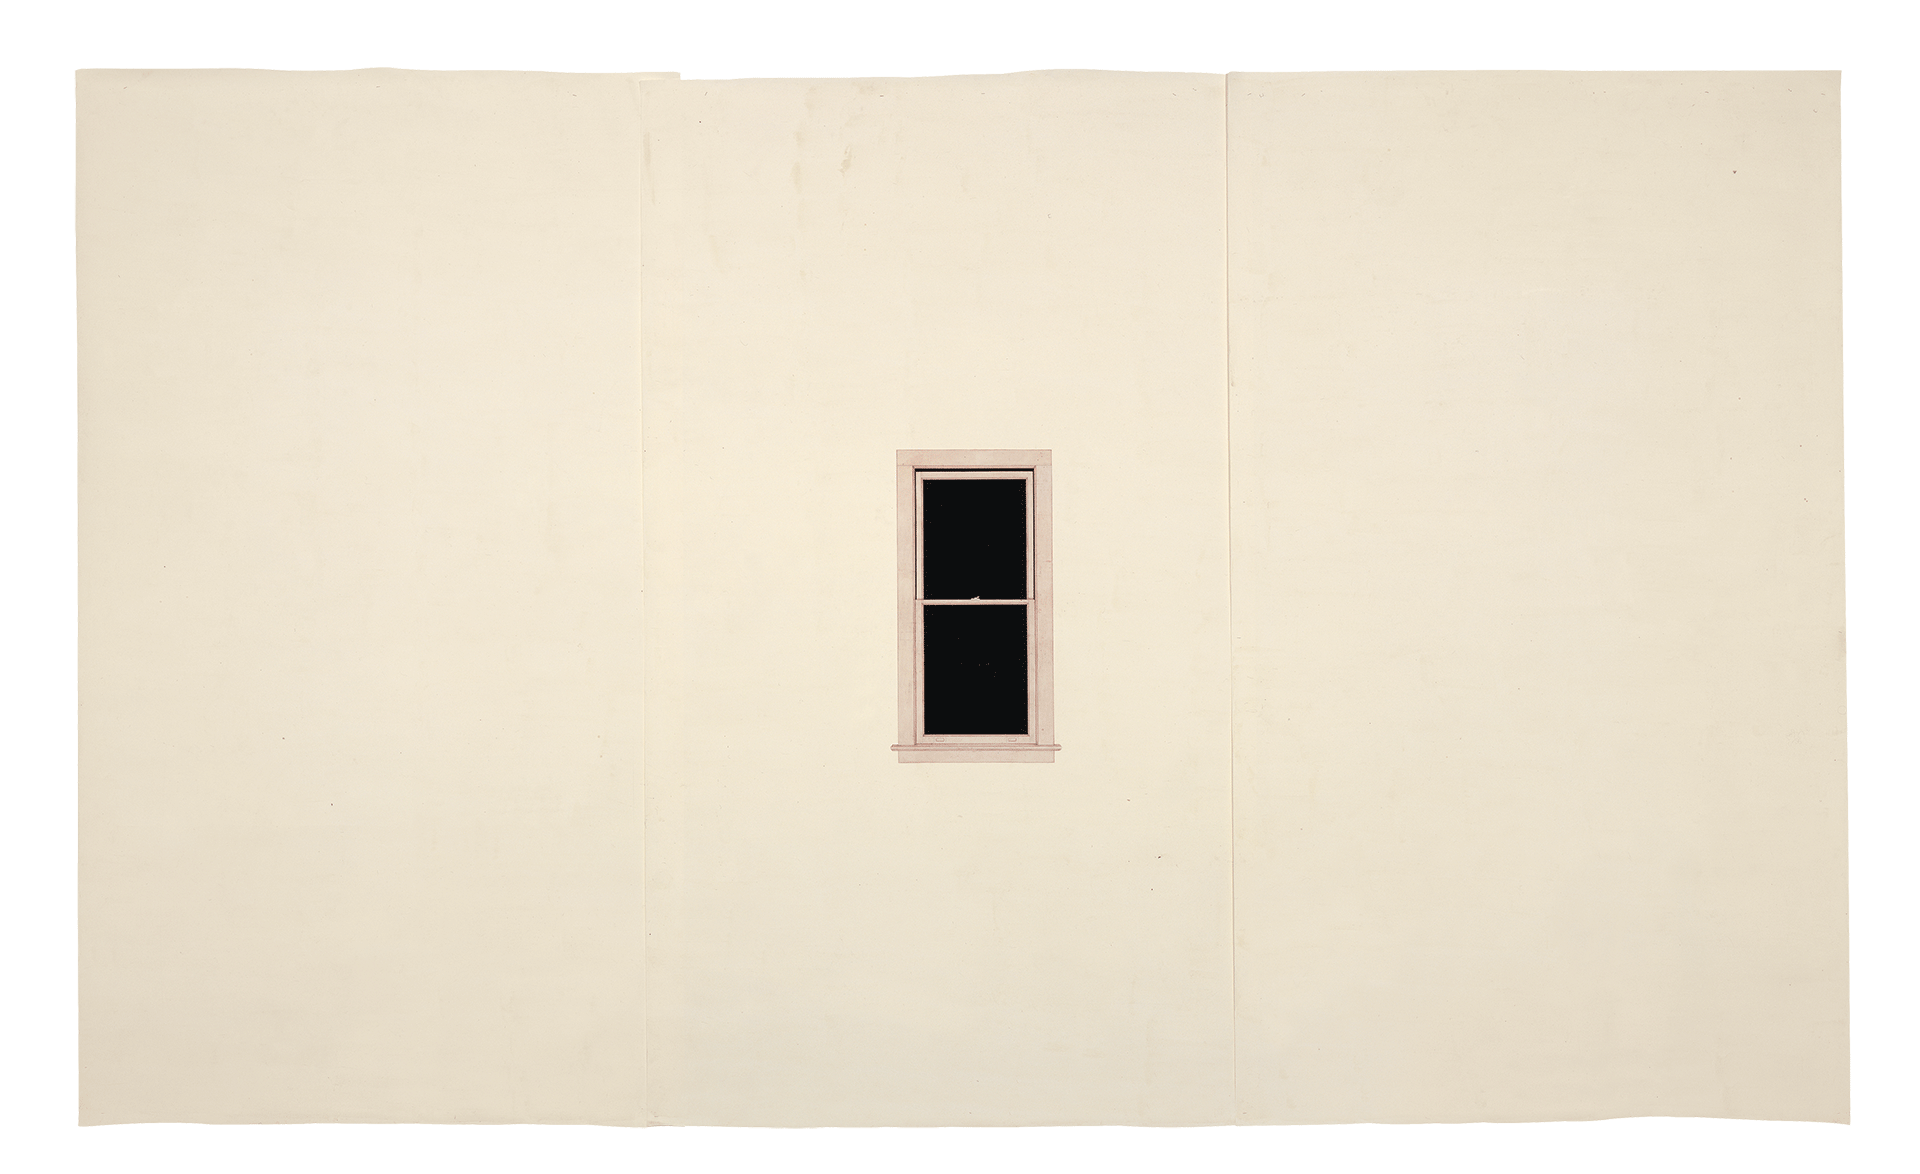 An oil and wax work on paper by Toba Khedoori, titled Untitled (window), dated 1999.